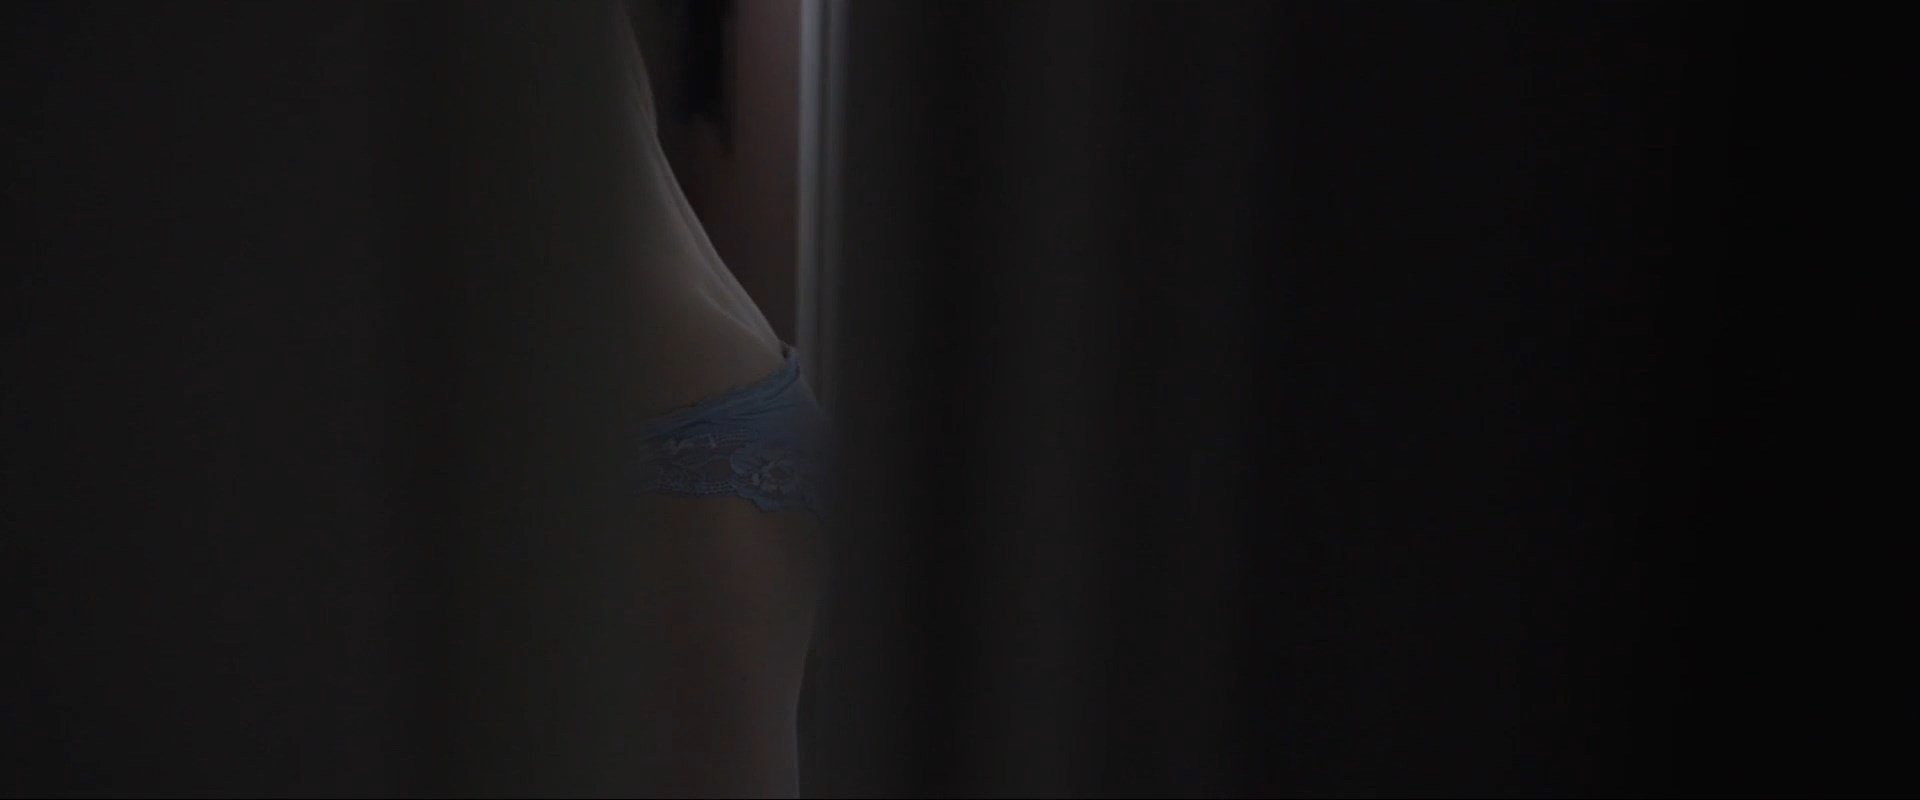 Erin Moriarty Sexy - Within (26 Pics + GIF  VIdeo)